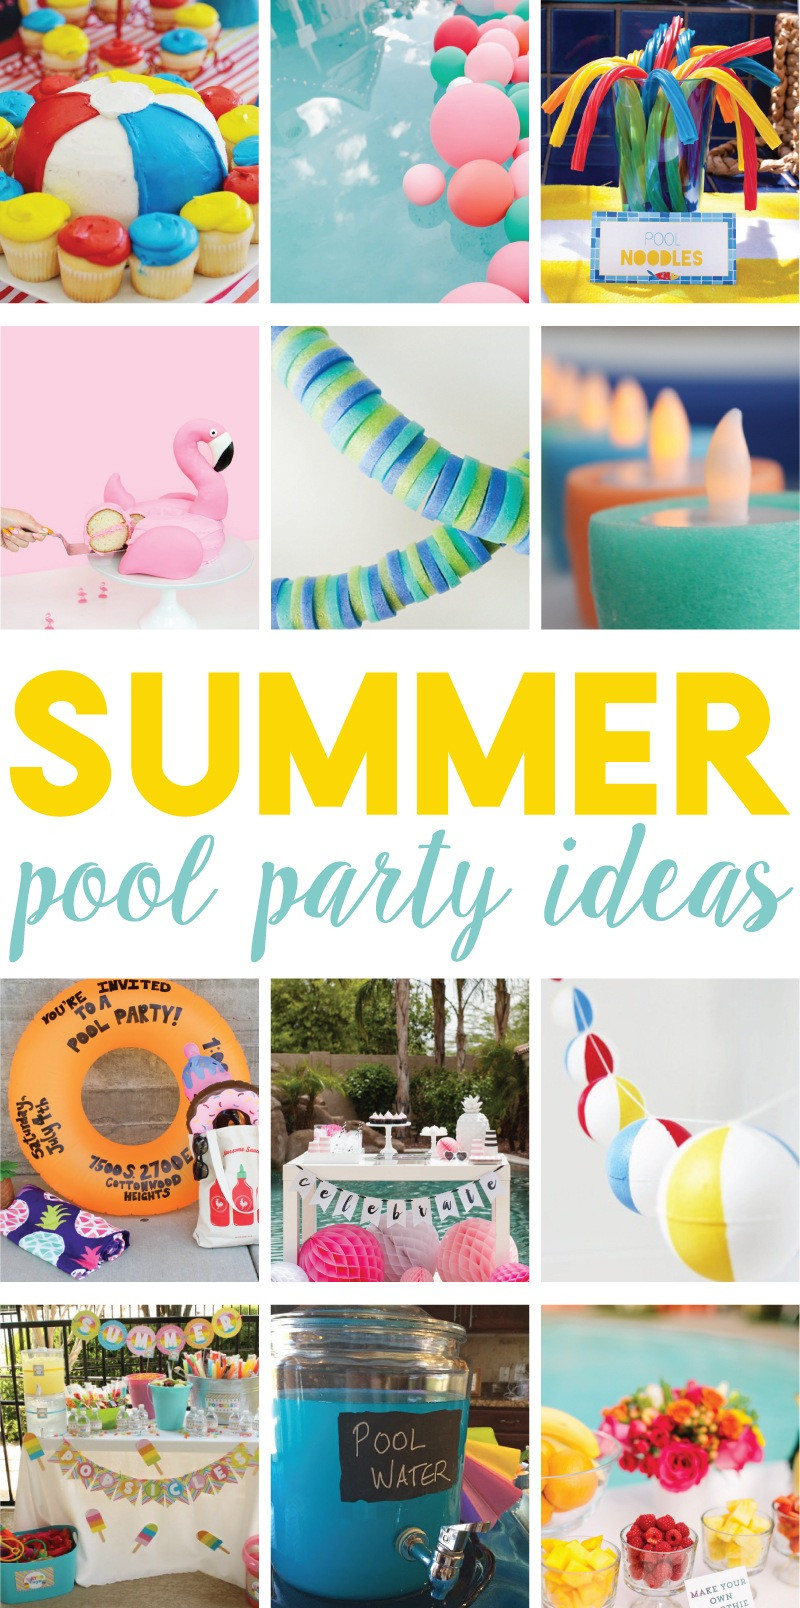 Pool Party Theme Ideas
 12 Easy Summer Pool Party Ideas on Love the Day